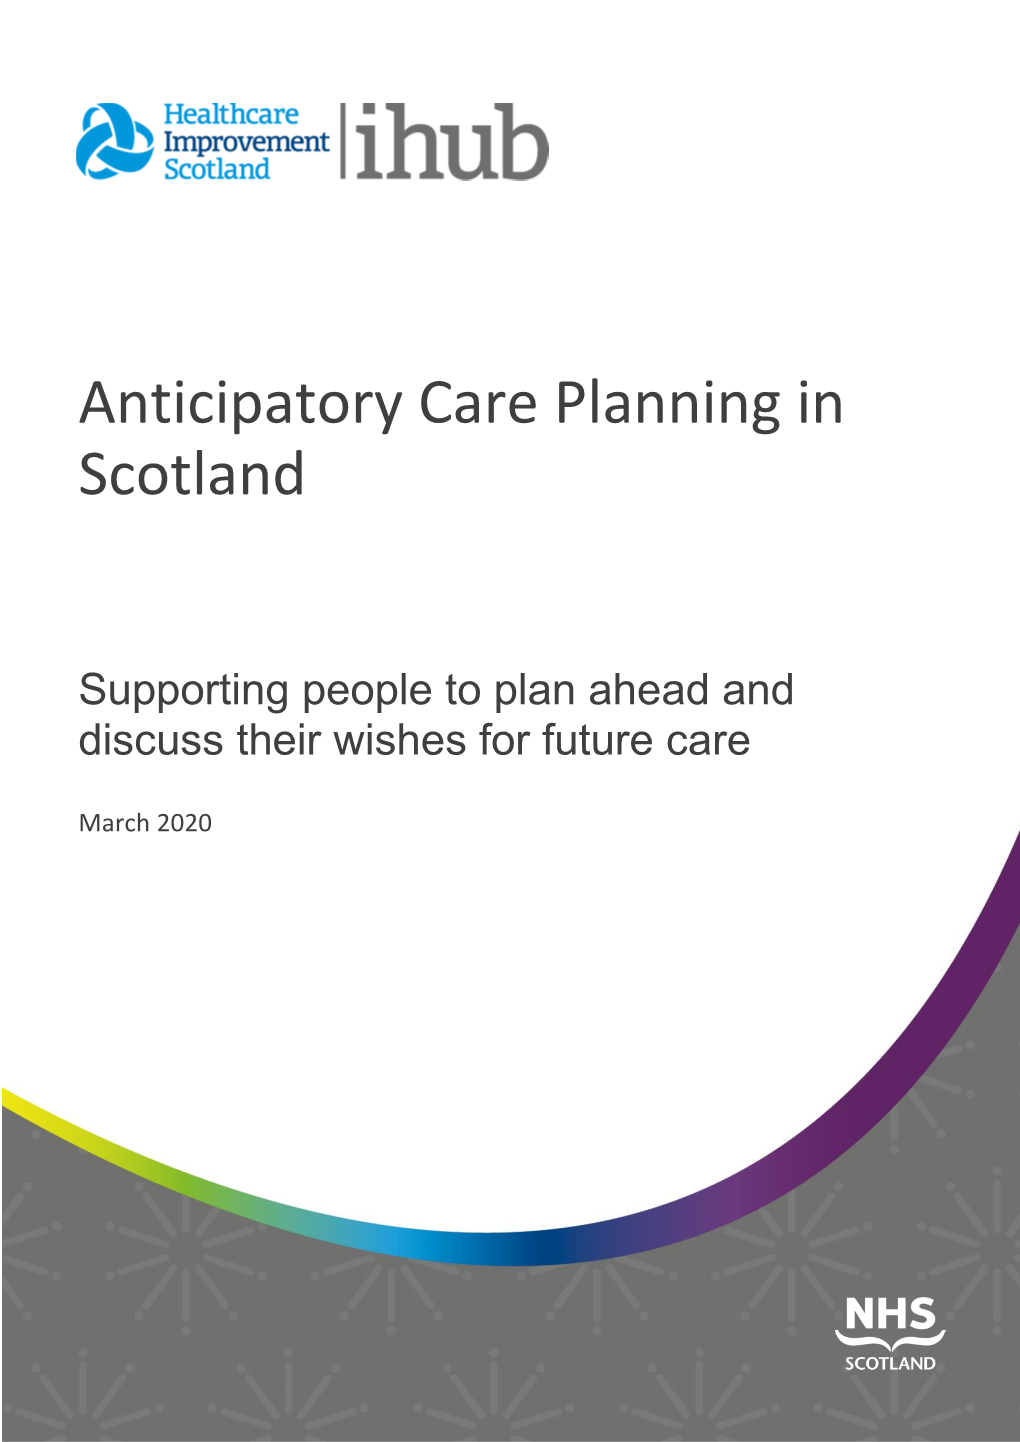 Anticipatory Care Planning in Scotland